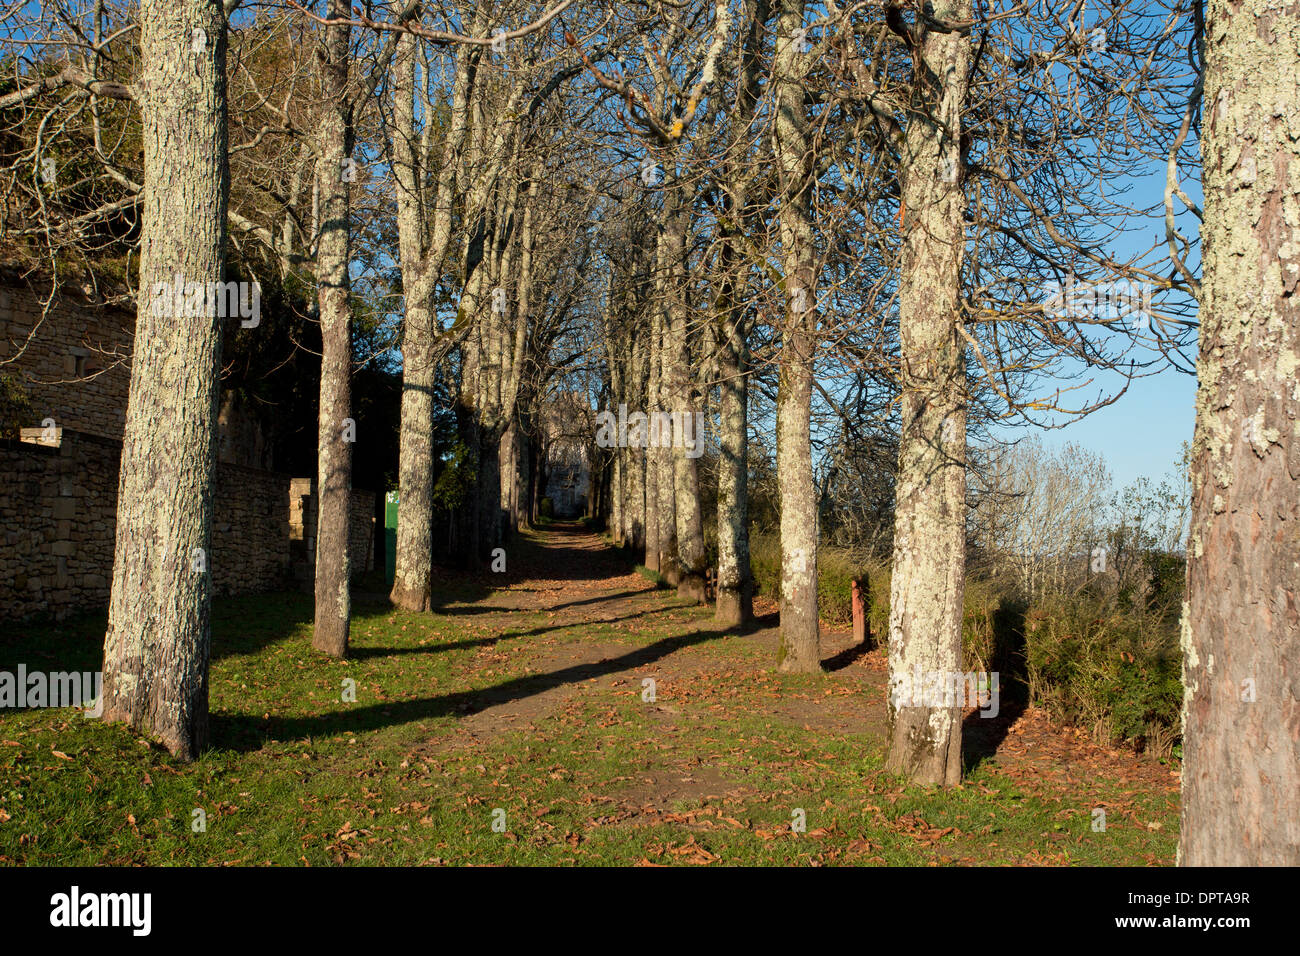 Horse chestnut avenue in the chateau gardens at Limeuil, Dordogne, France. Stock Photo